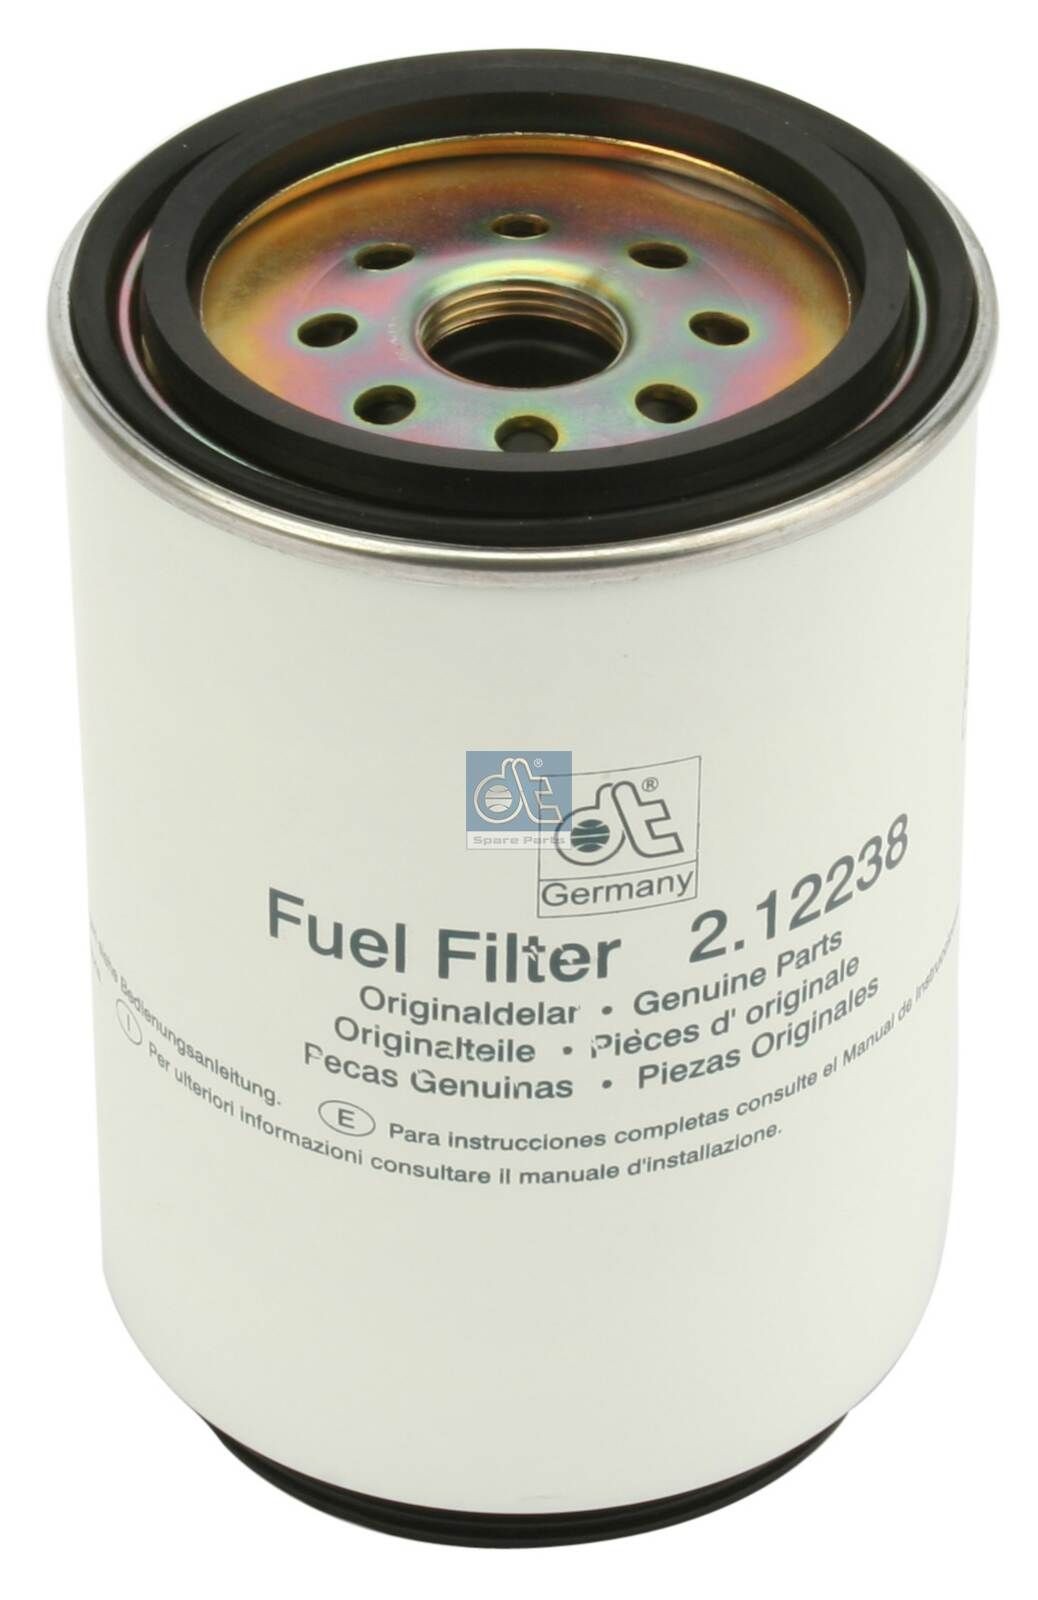 WK 1060/5 x DT Spare Parts 2.12238 Fuel filter S234011441